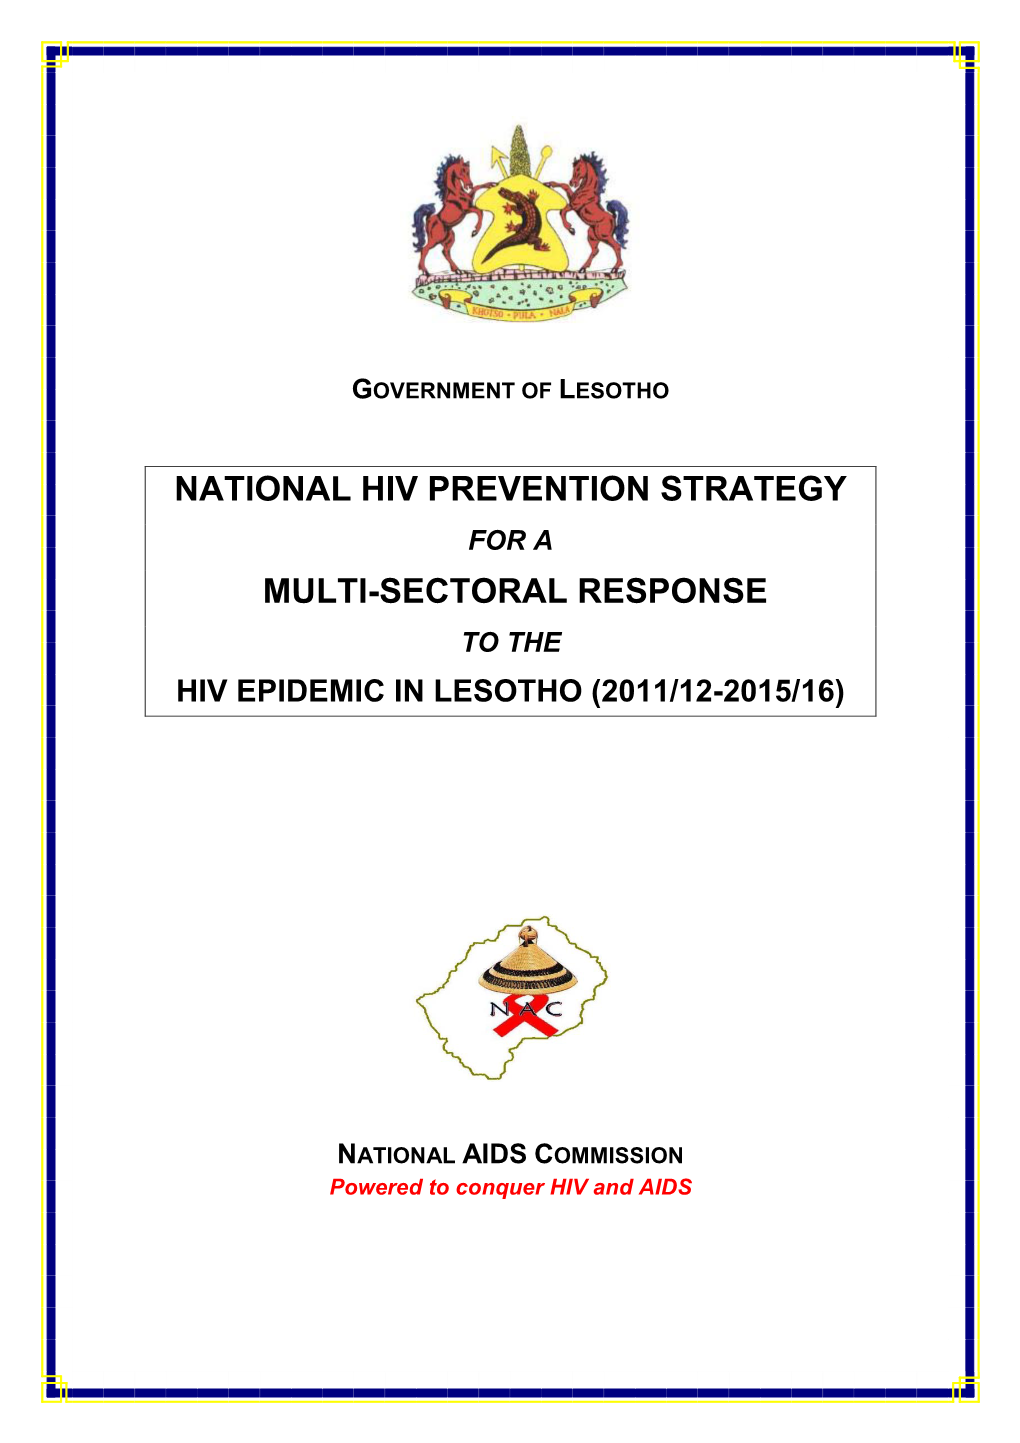 National Hiv Prevention Strategy for a Multi-Sectoral Response to the Hiv Epidemic in Lesotho (2011/12-2015/16)